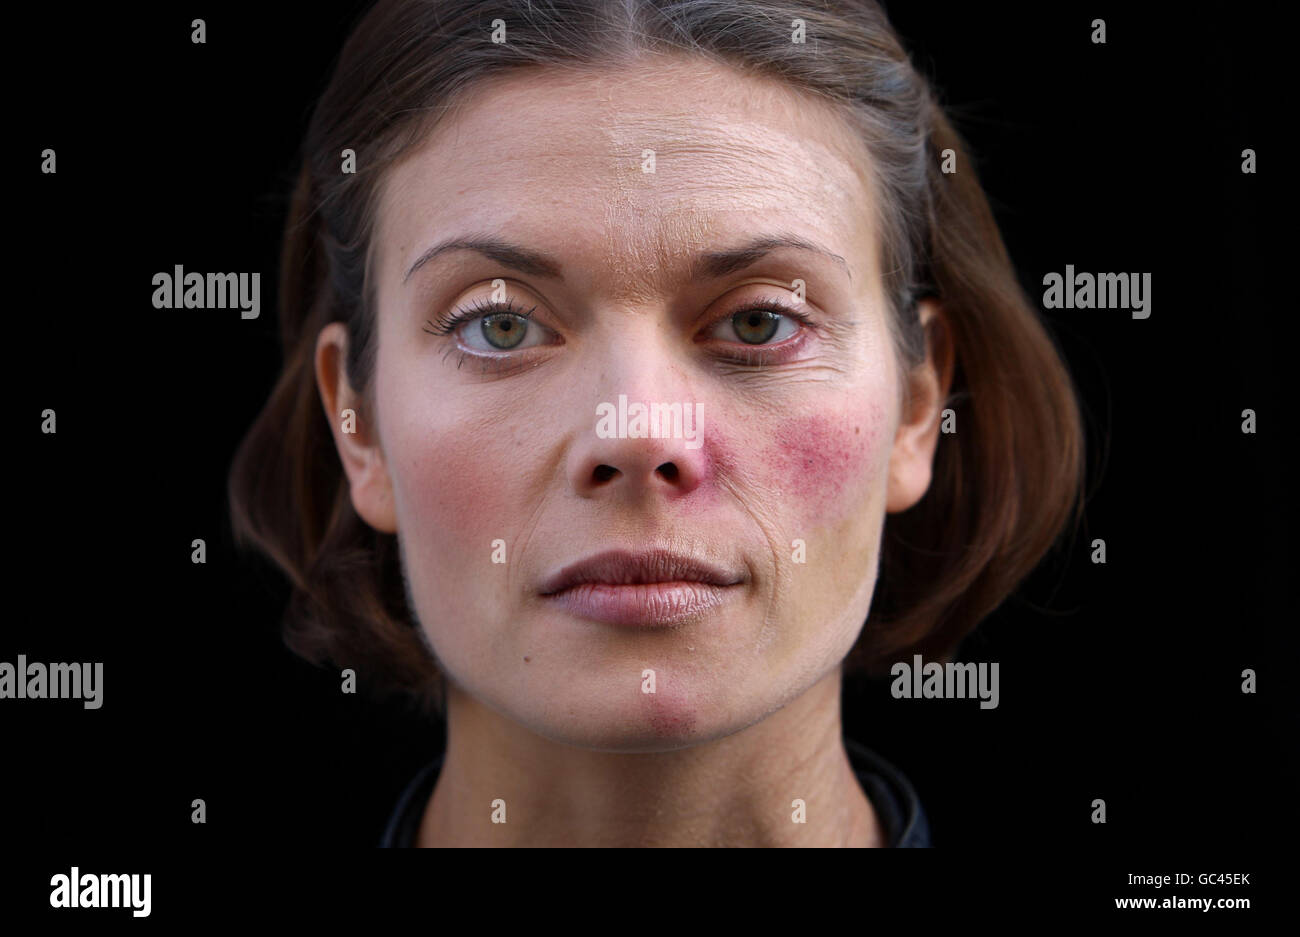 Model Julia Bisby poses to demonstrate the effects of excessive alcohol consumption on her appearance. Stock Photo